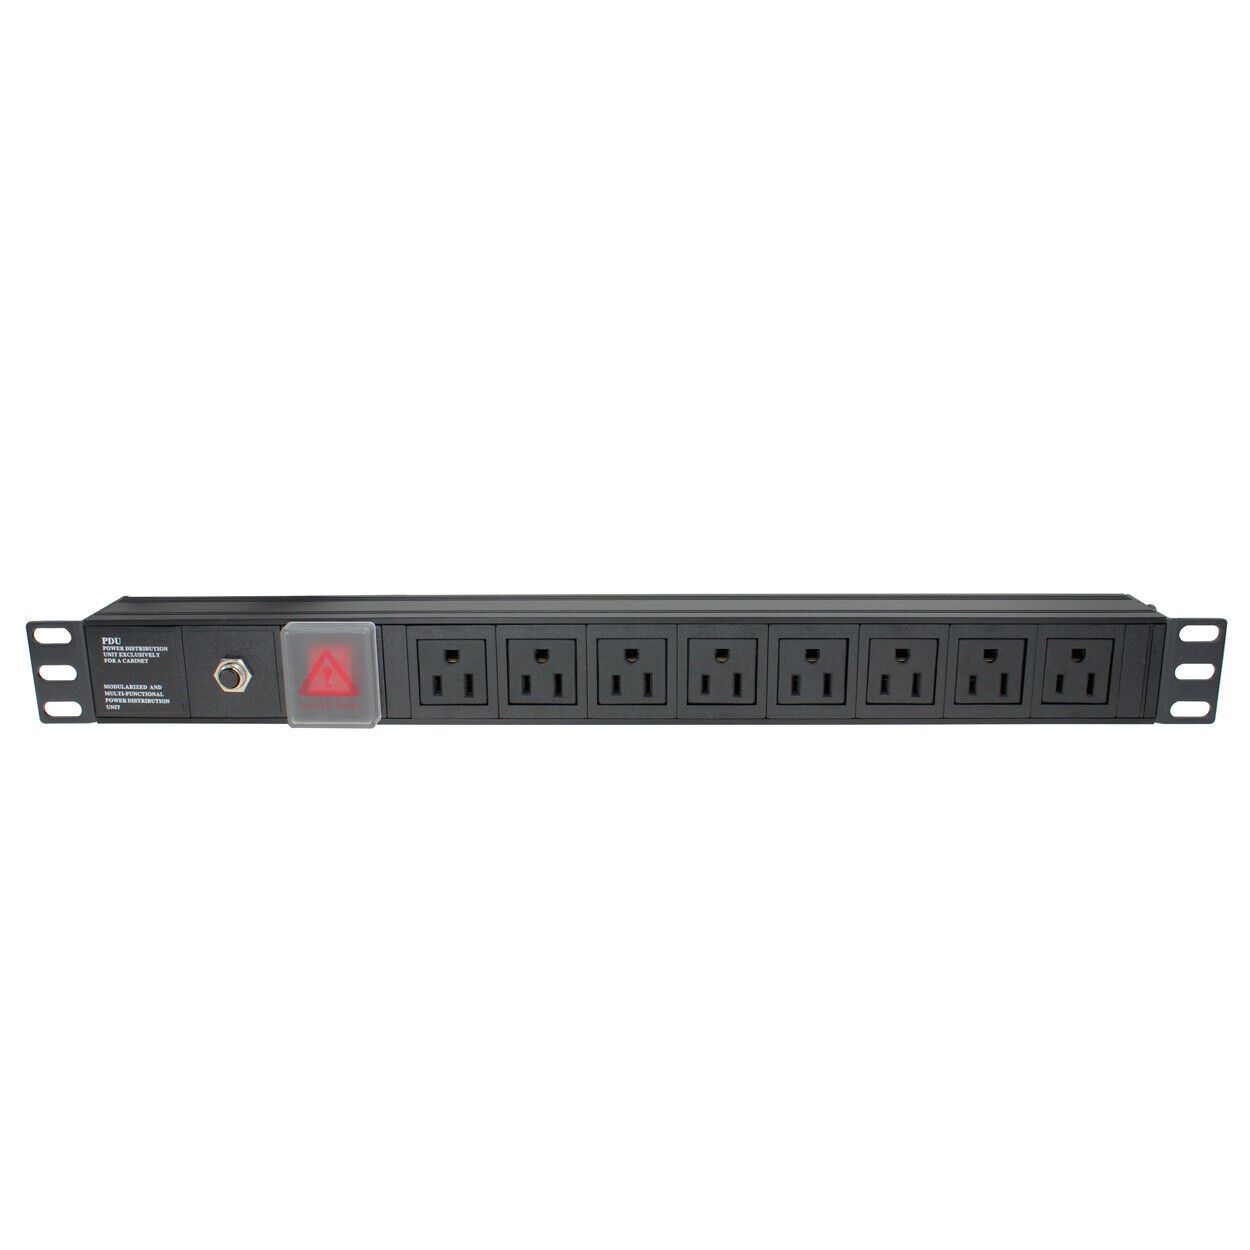 PI Manufacturing TL-RM8-1 8 Outlet 19 inch 1U Rackmount Power Strip 15AMP